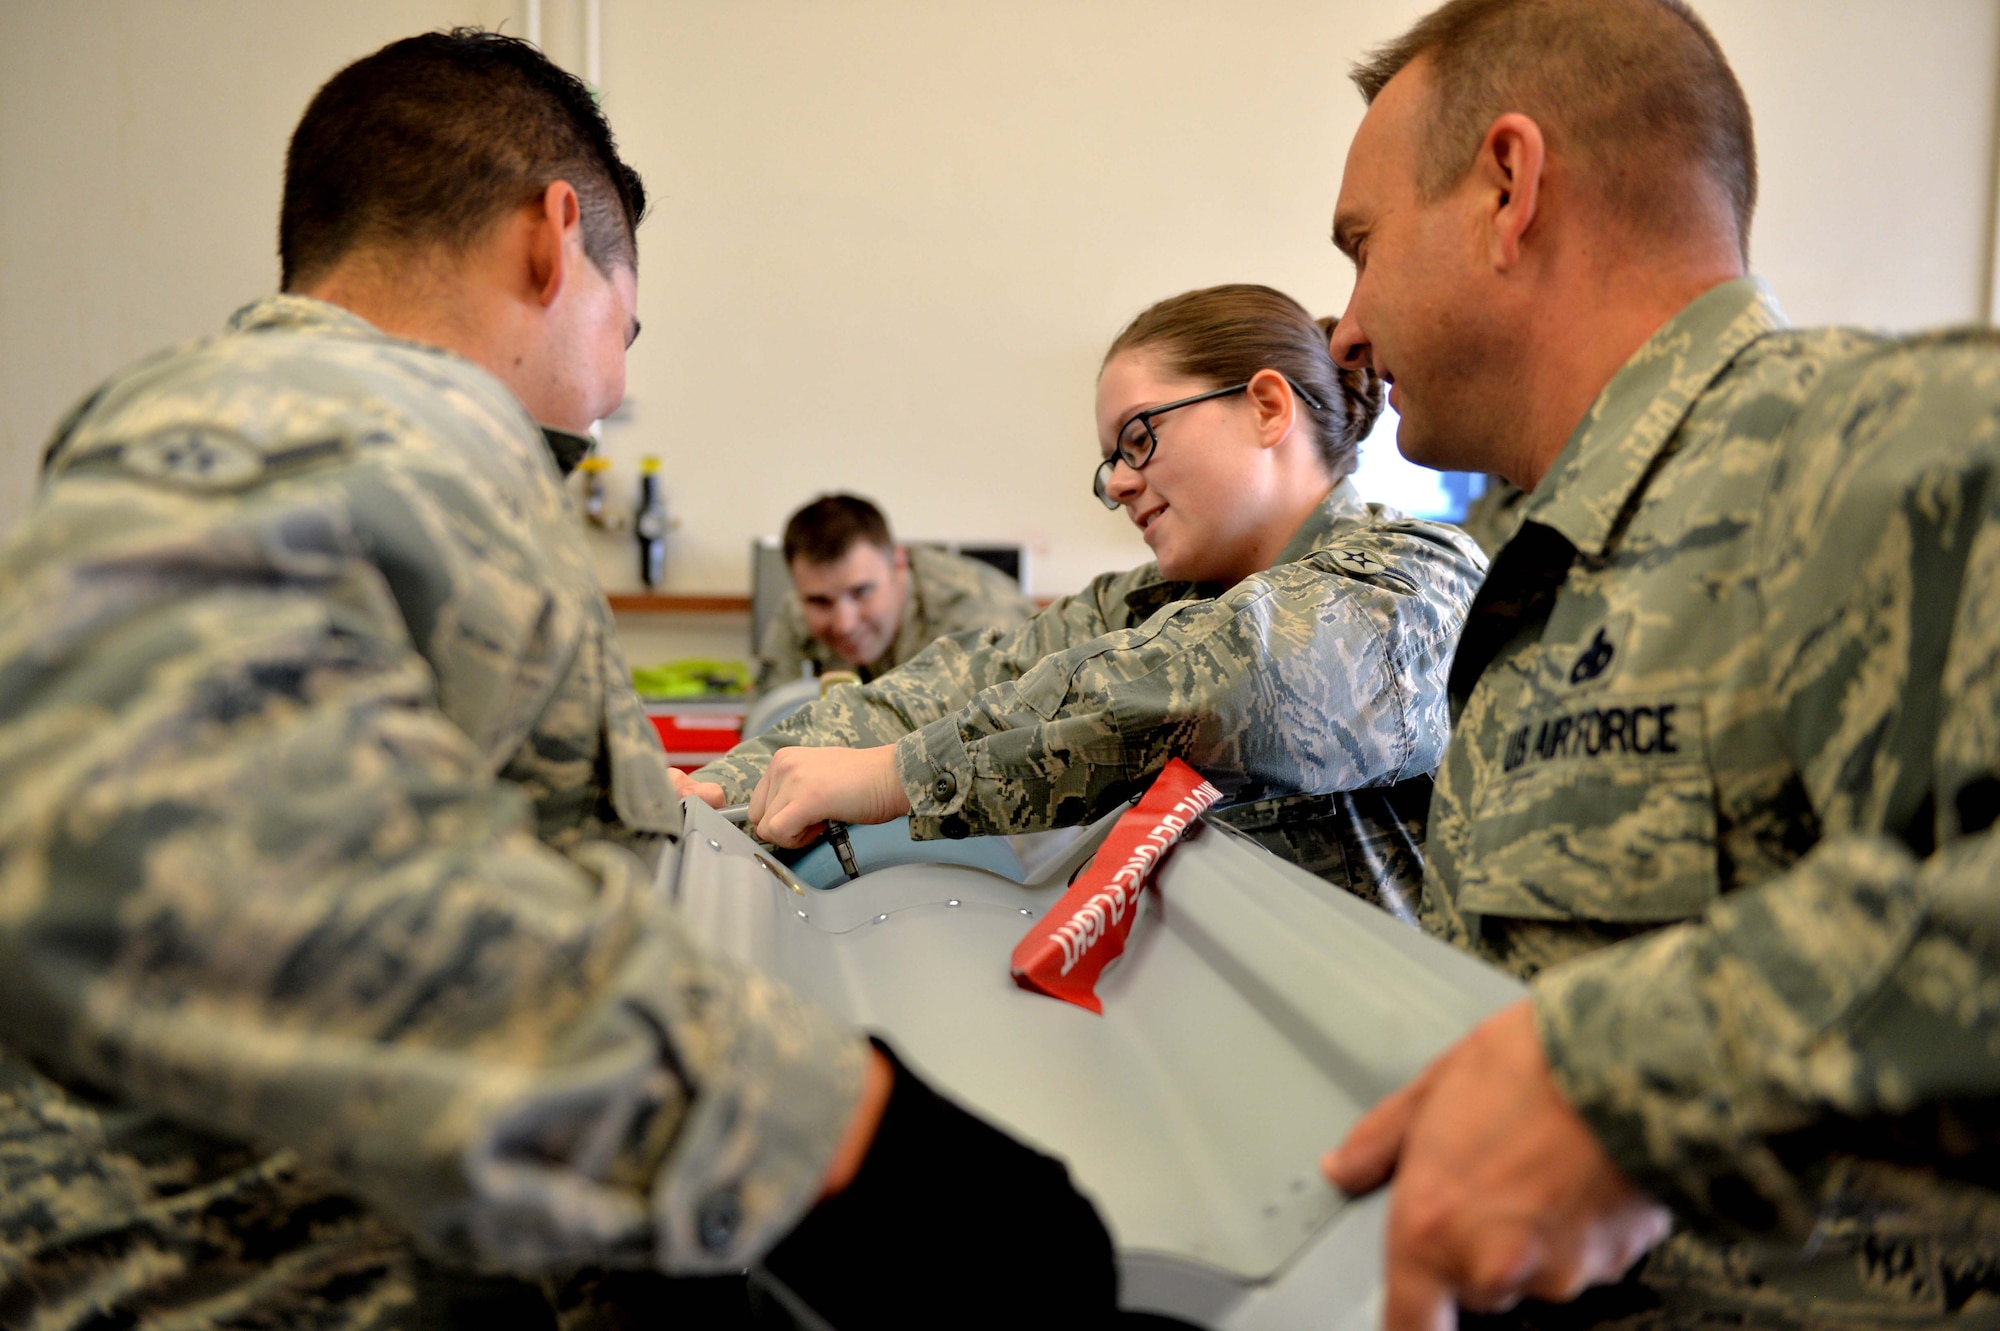 Chief Master Sgt. Michael Ditore, 432nd Wing/432nd Air Expeditionary Wing command chief assists Airman Andrew and Airman Emily, both 432nd Maintenance Squadron munitions flight crew members to perform maintenance on six inert GBU-12 Paveway II laser-guided bombs April 27, 2016, at Creech Air Force Base, Nevada. Col. Case Cunningham, 432nd Wg/432nd AEW commander, also assisted in the build as part of Ditore’s shadow an Airman initiative, a program implemented as an avenue for Ditore and Cunningham to meet their Airmen and boost morale within the wing. (U.S. Air Force photo by Airman 1st Class Kristan Campbell/Released).